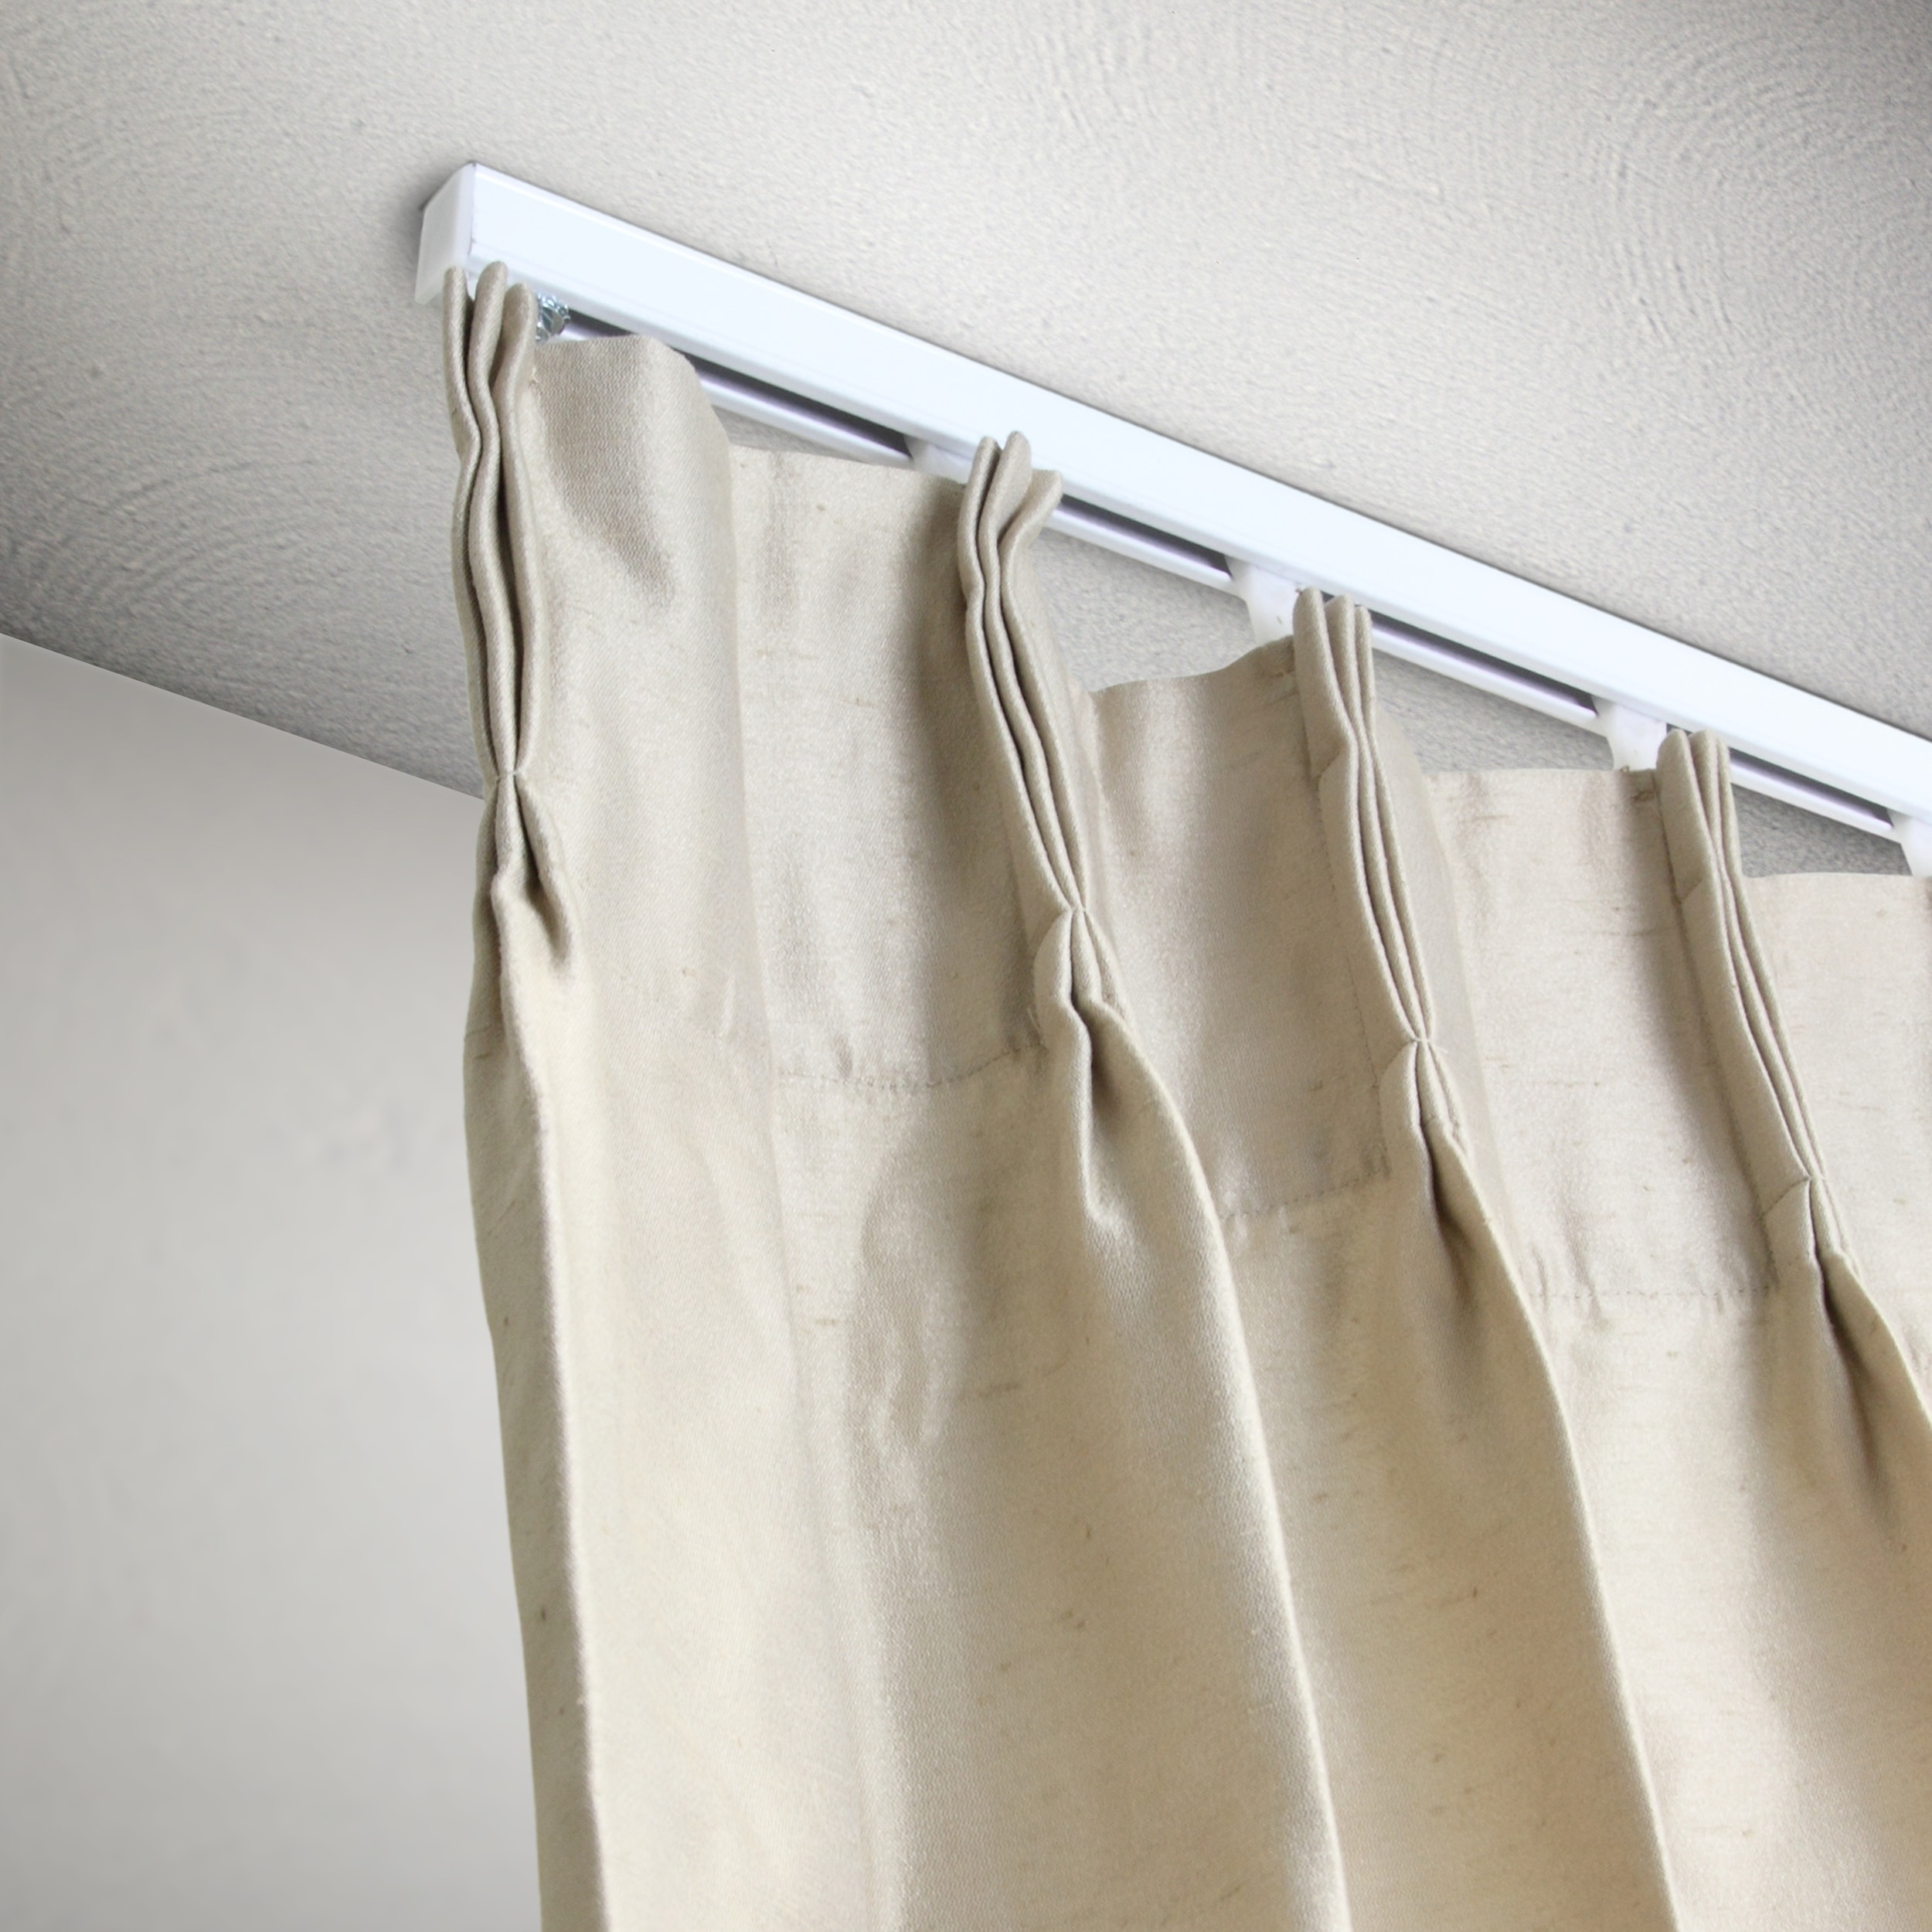 InStyleDesign Heavy Duty White Ceiling Curtain Track / Room